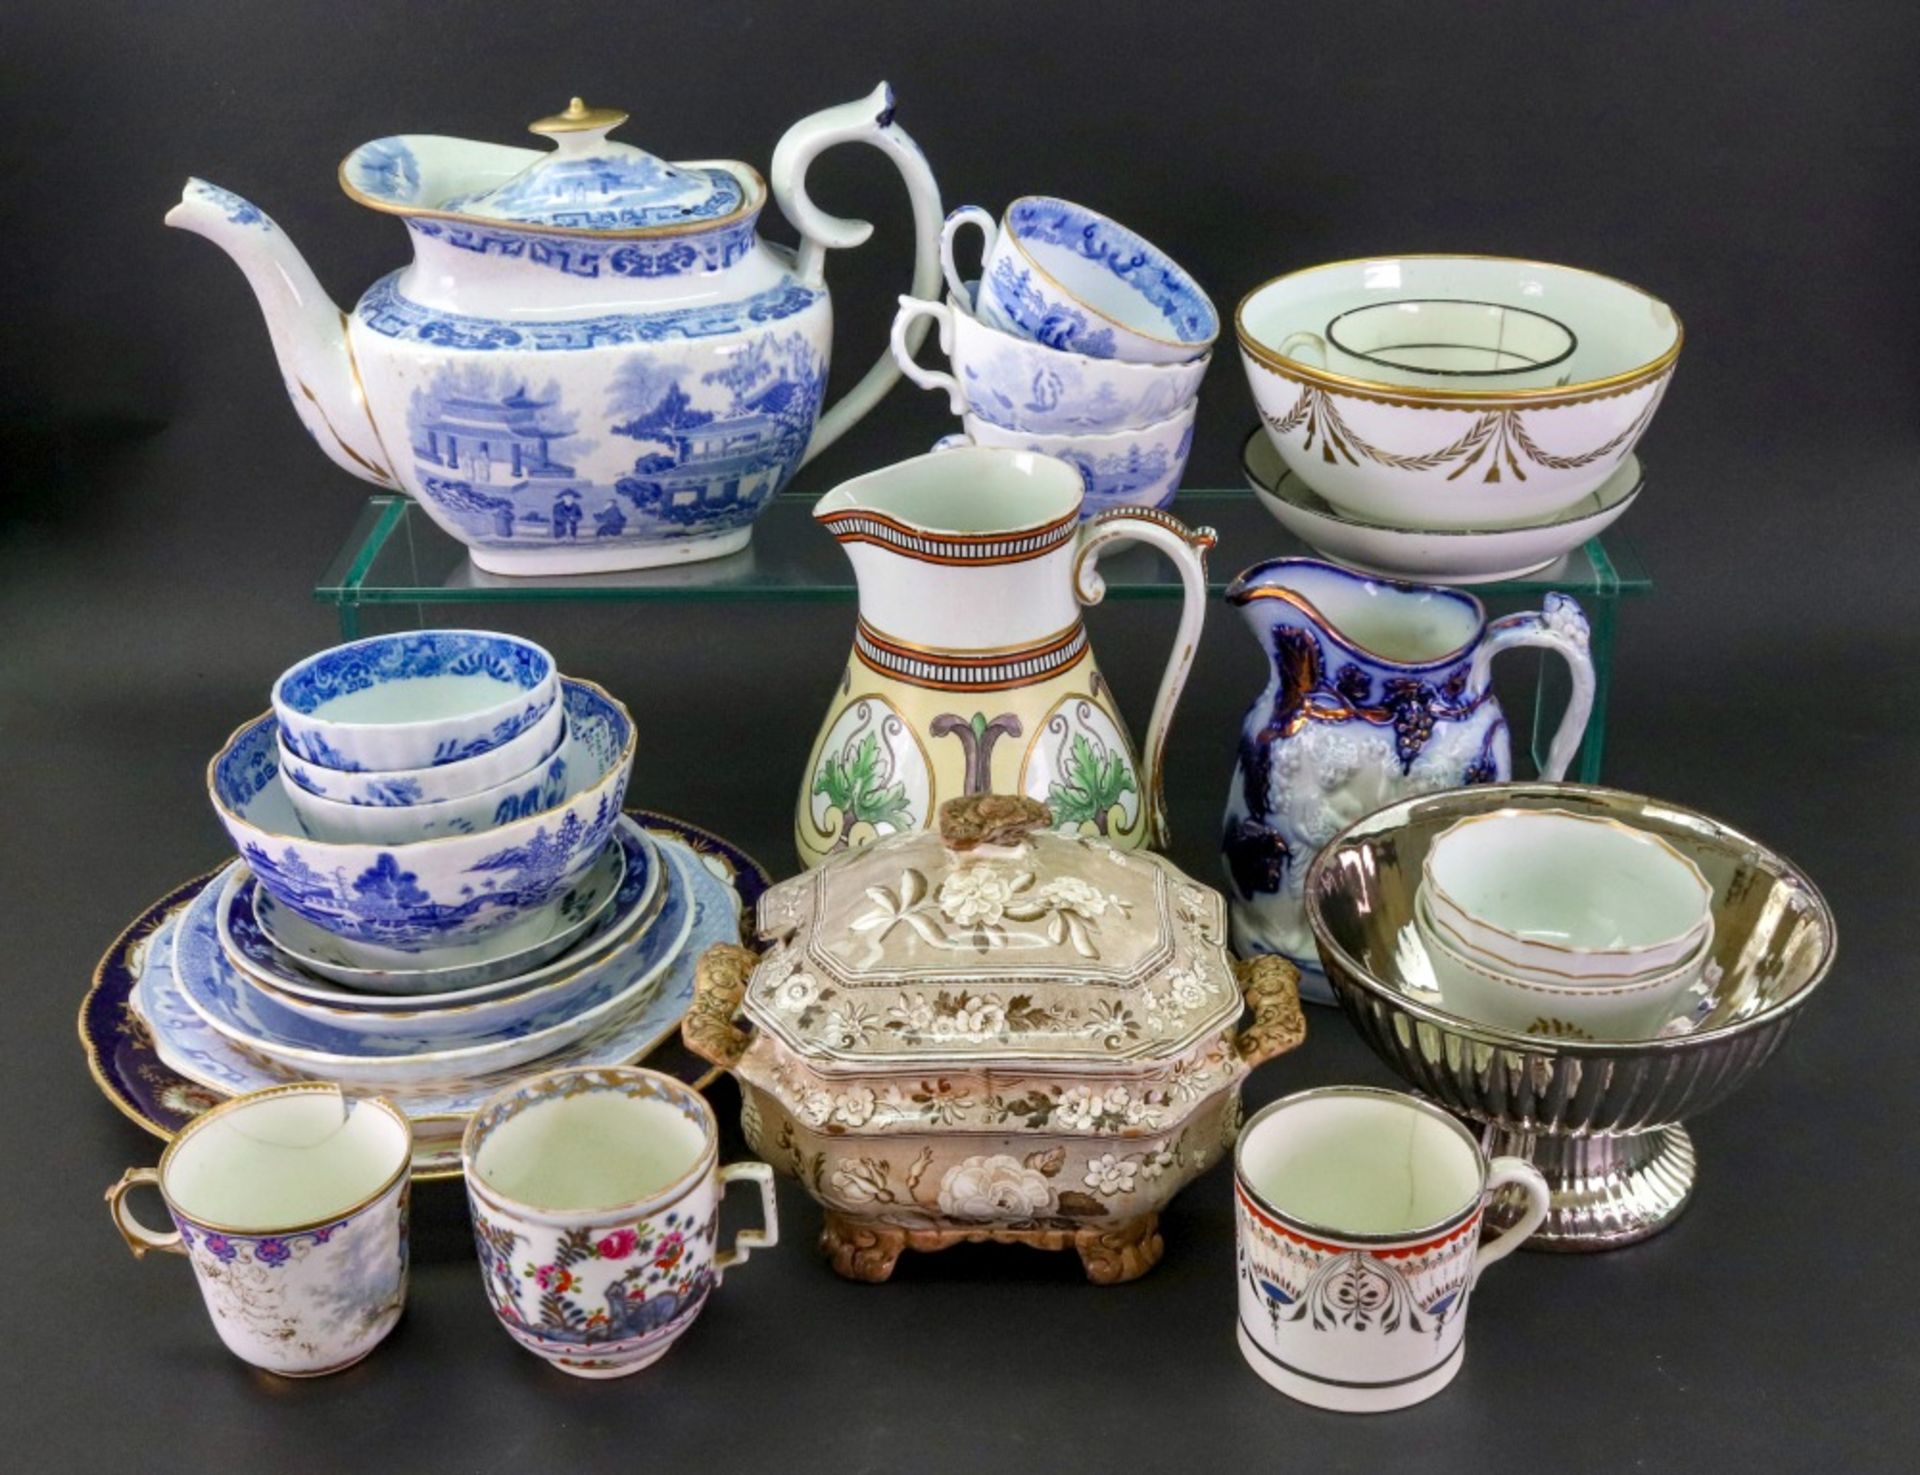 A group of English and continental porcelain and pottery, 18th/19th century,